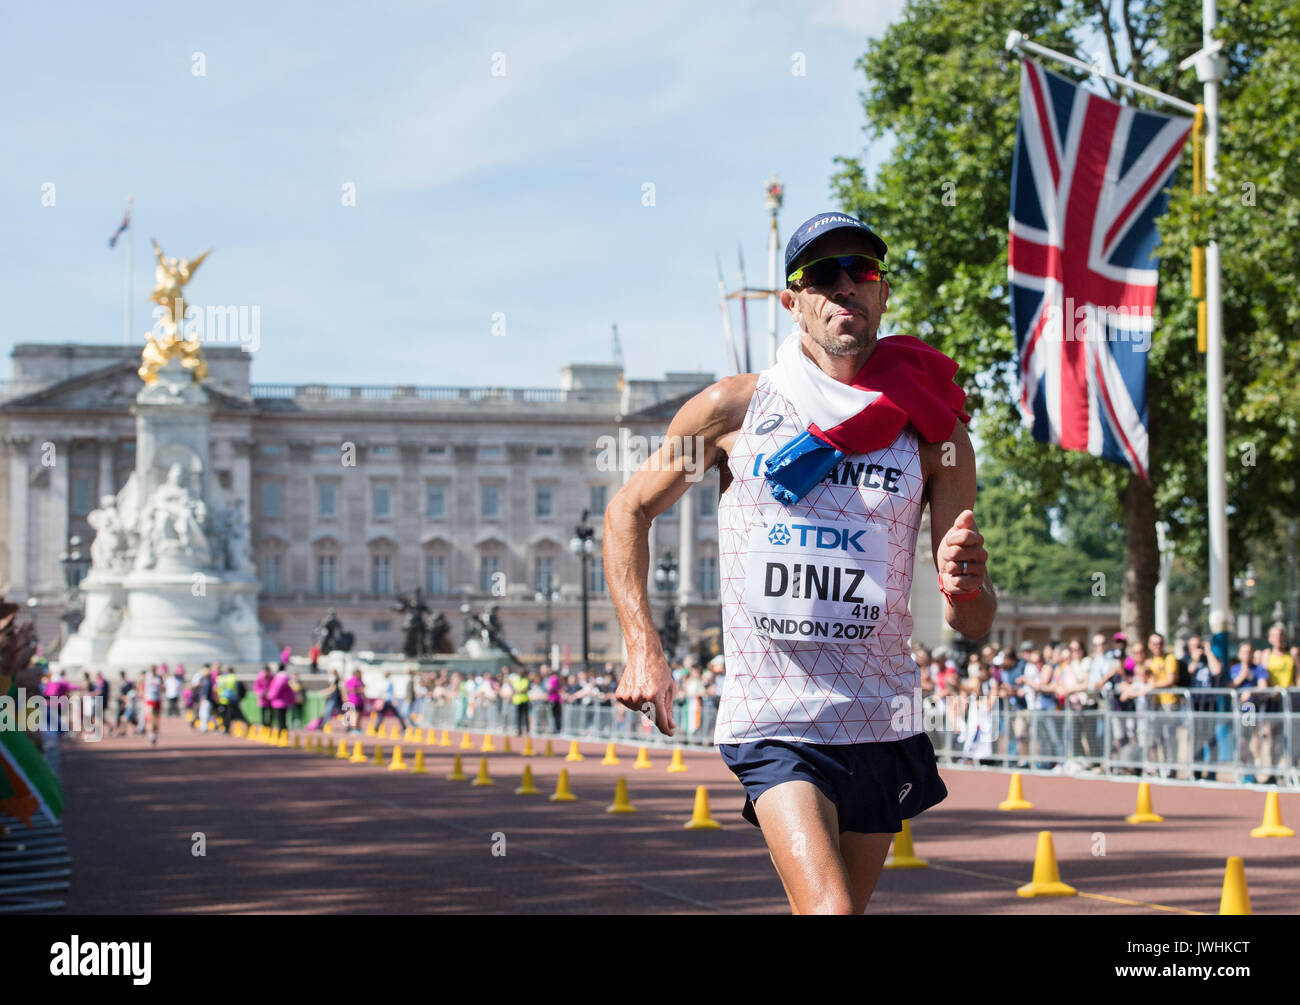 London, UK. 13th Aug, 2017. French athlete Yohann Diniz wears a French flag around his neck as he nears the finish line after competing in the 50 kilometre marathon at the IAAF London 2017 World Athletics Championships in London, United Kingdom, 13 August 2017. Photo: Rainer Jensen/dpa/Alamy Live News Stock Photo